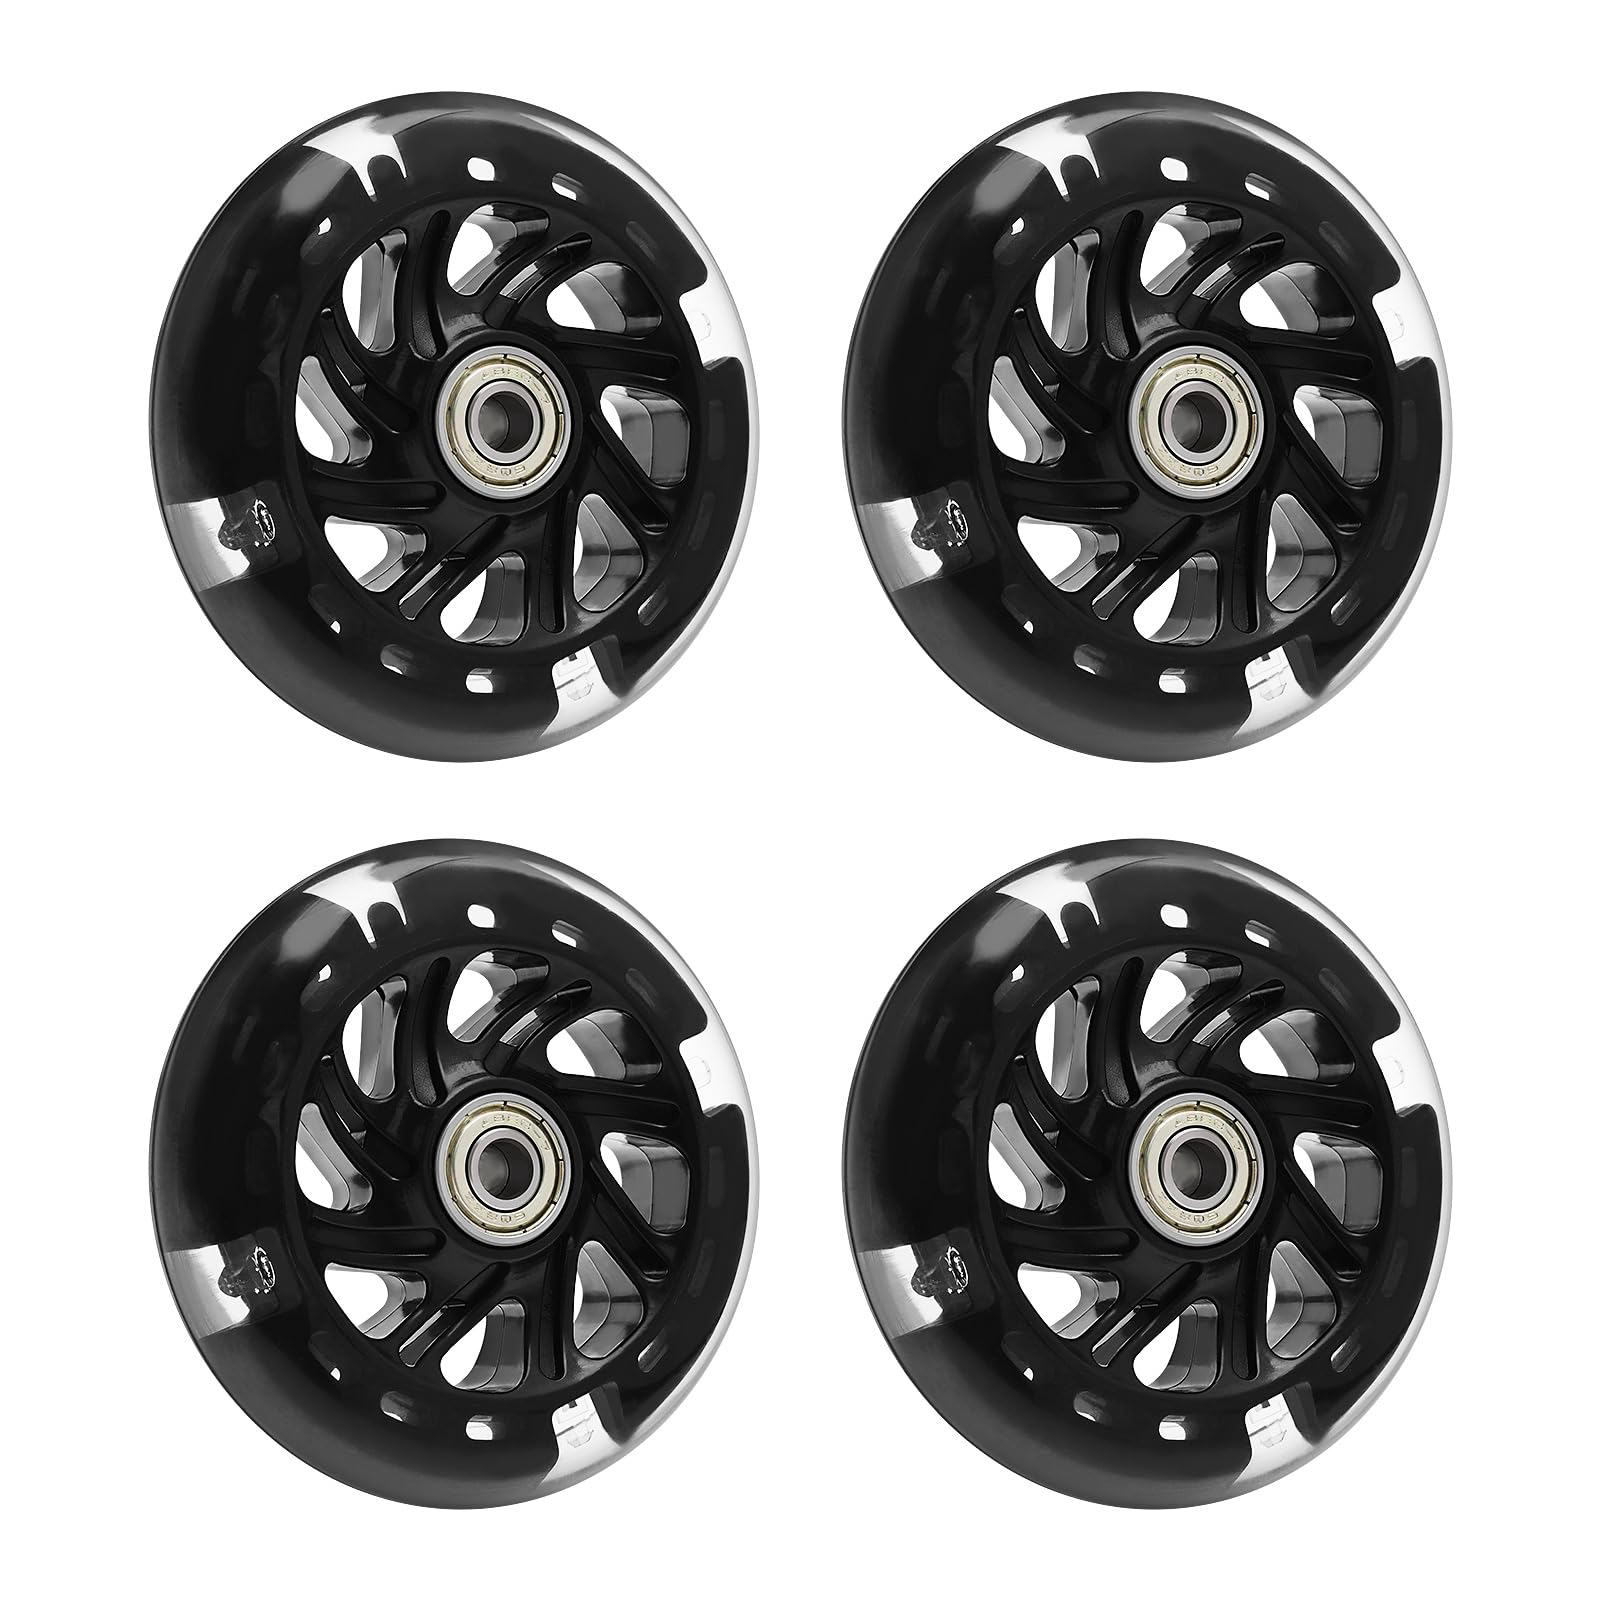 EMSea 4PCS Scooter Silent Luminous Crystal Wheels Black Hub with Bearings Flashing 3 Colors Replacement Wheels for Scooter 100x100mm von EMSea